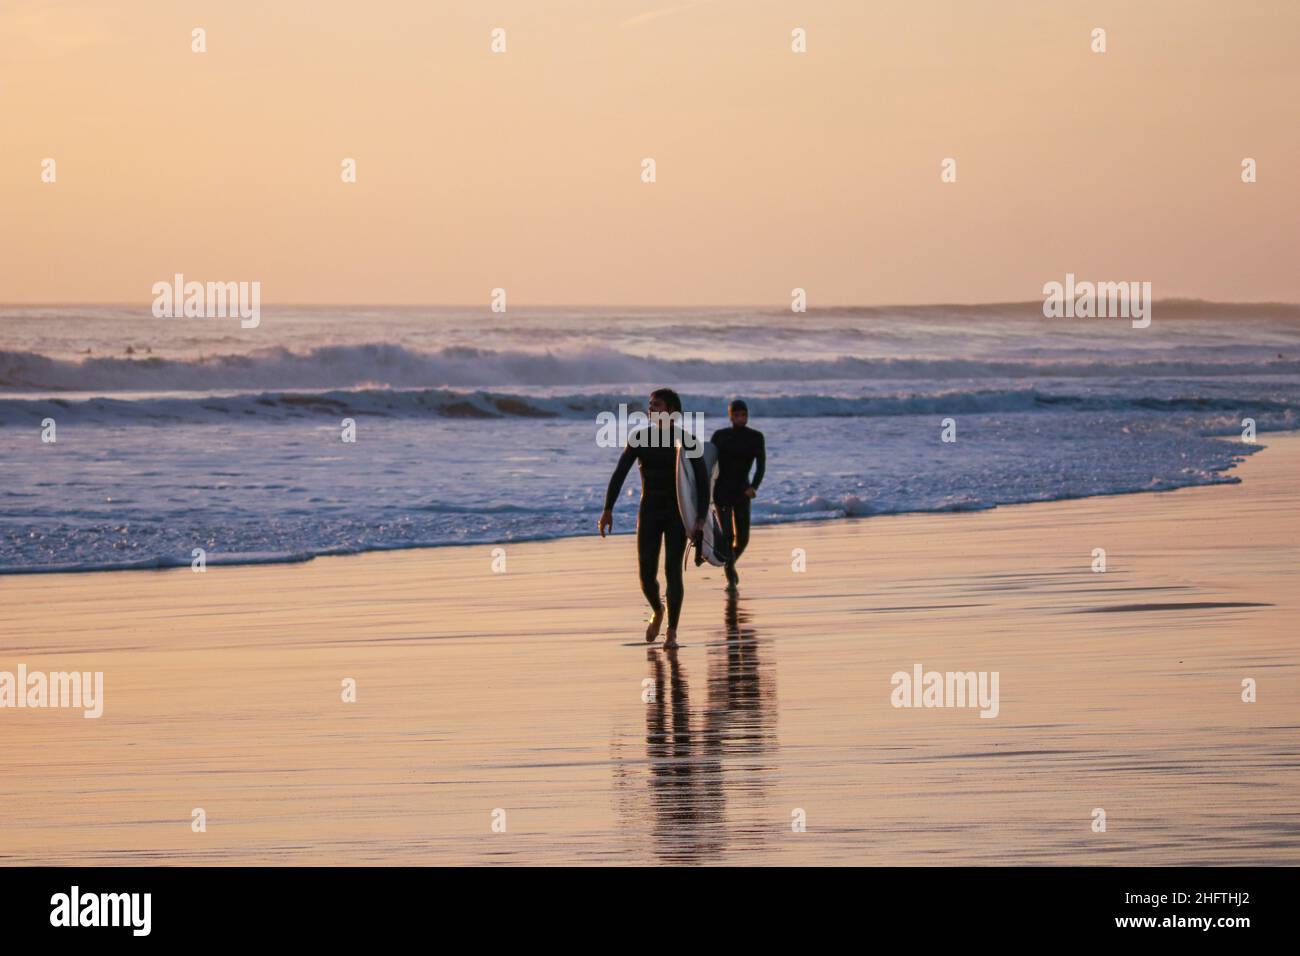 Two Surfers with surfboard going to surf in a beach at the sunset. Stock Photo